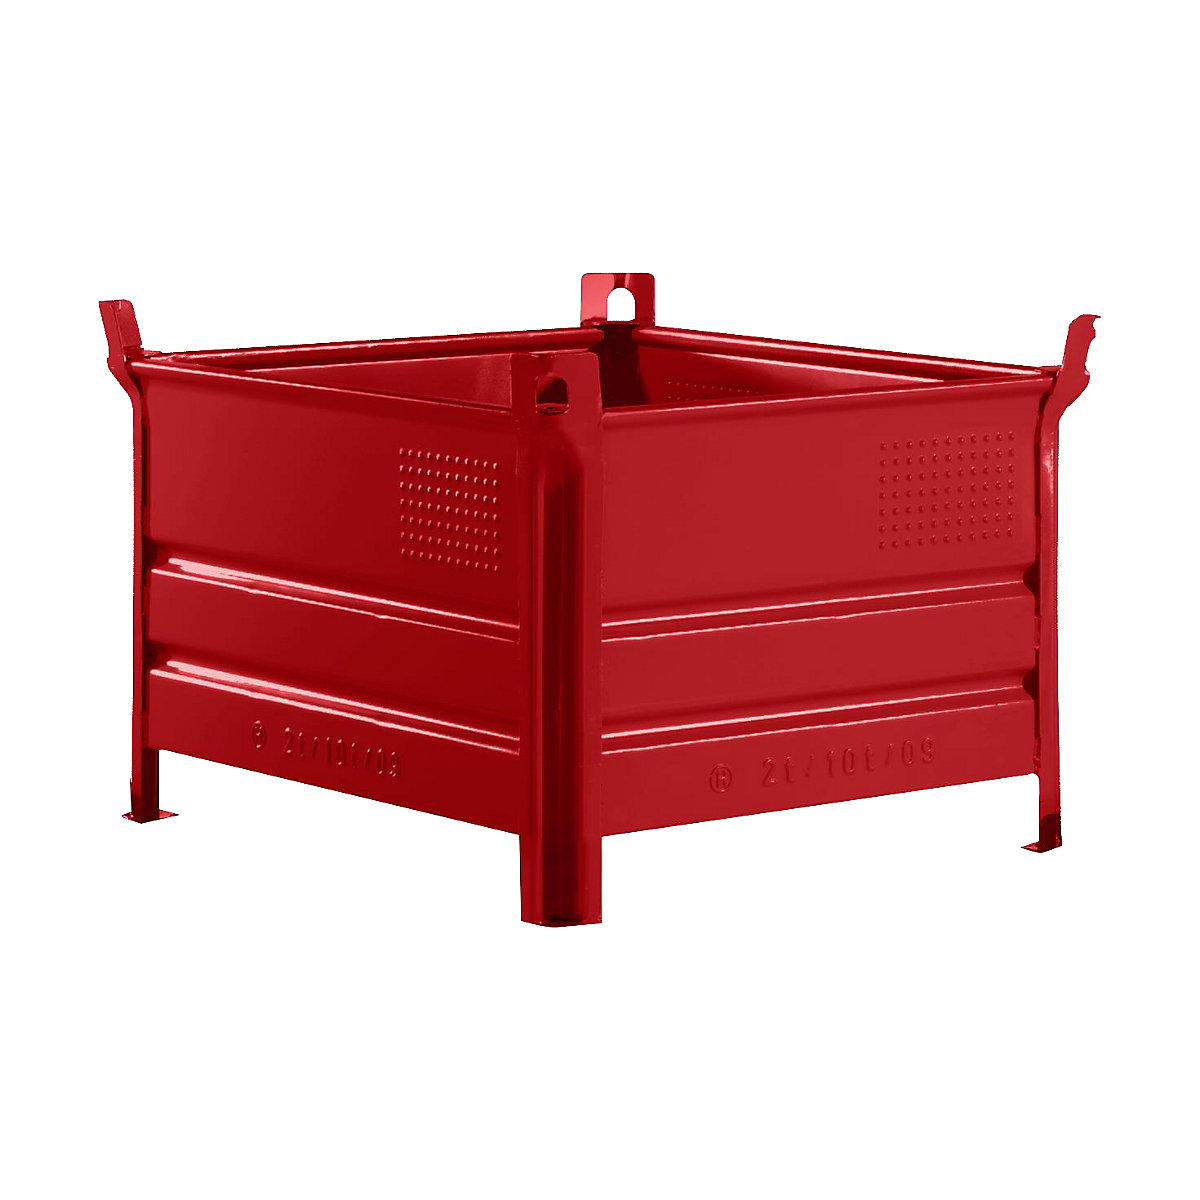 Stacking container with runners – Heson